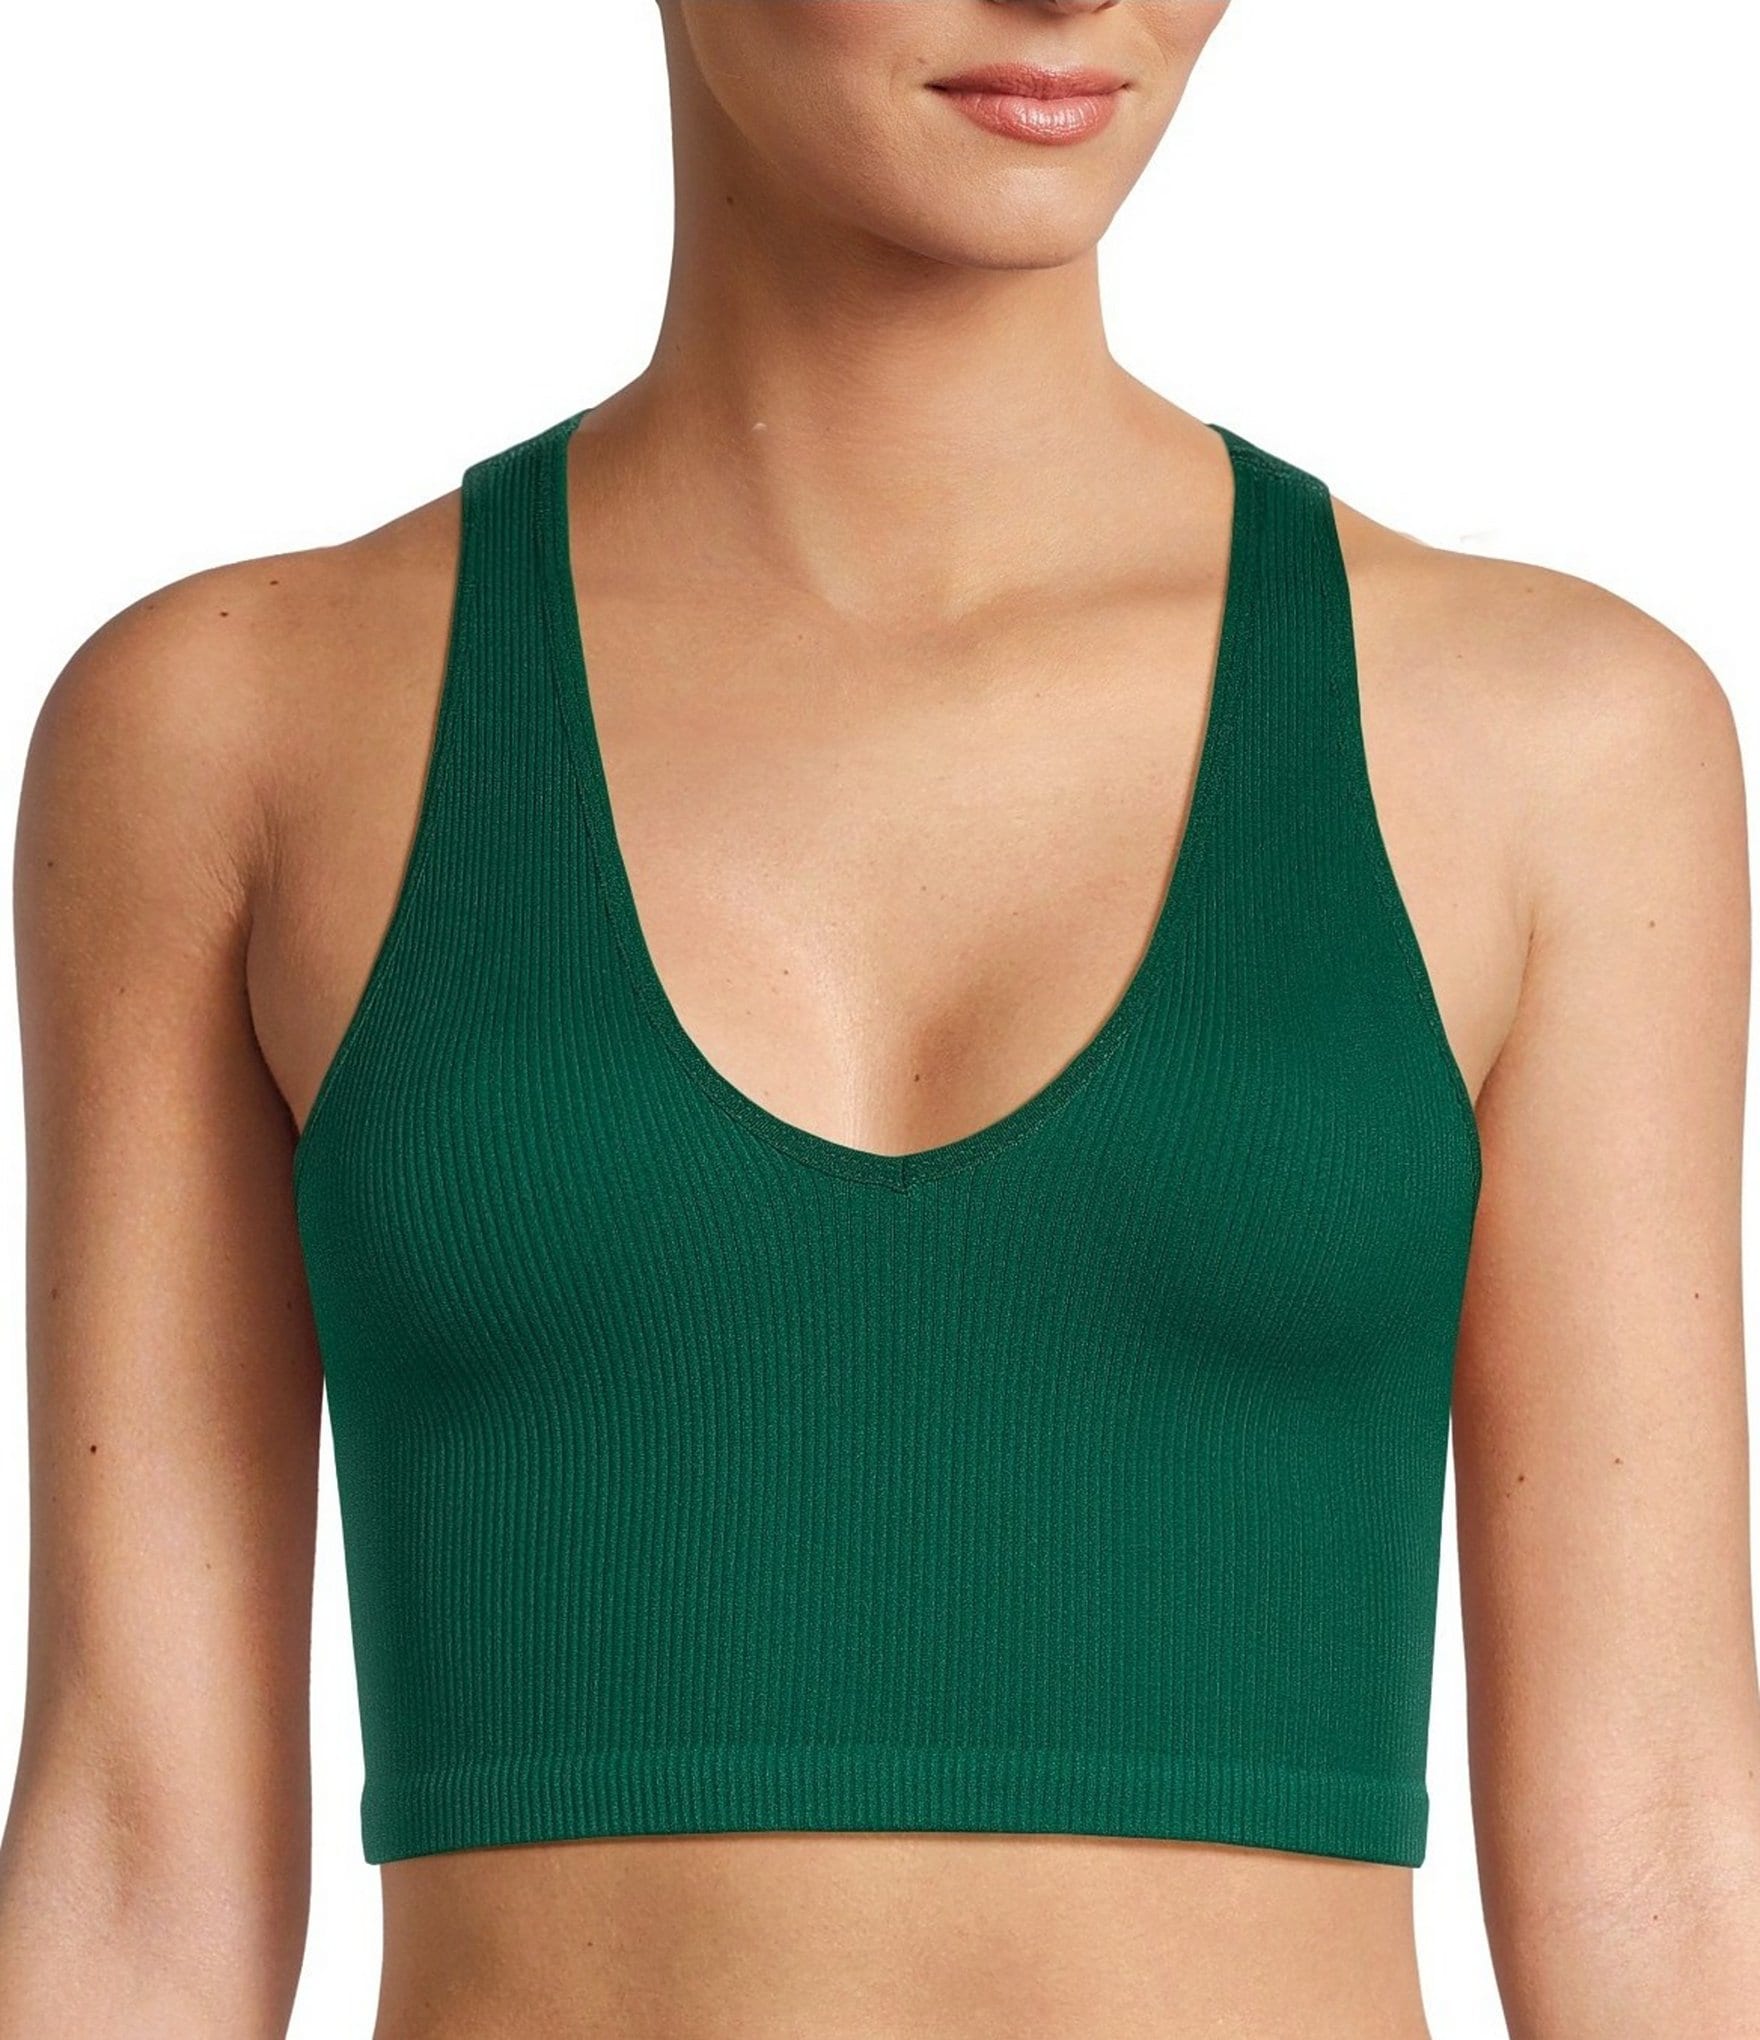 Lingerie-Inspired Cropped Tank Top - Ready to Wear